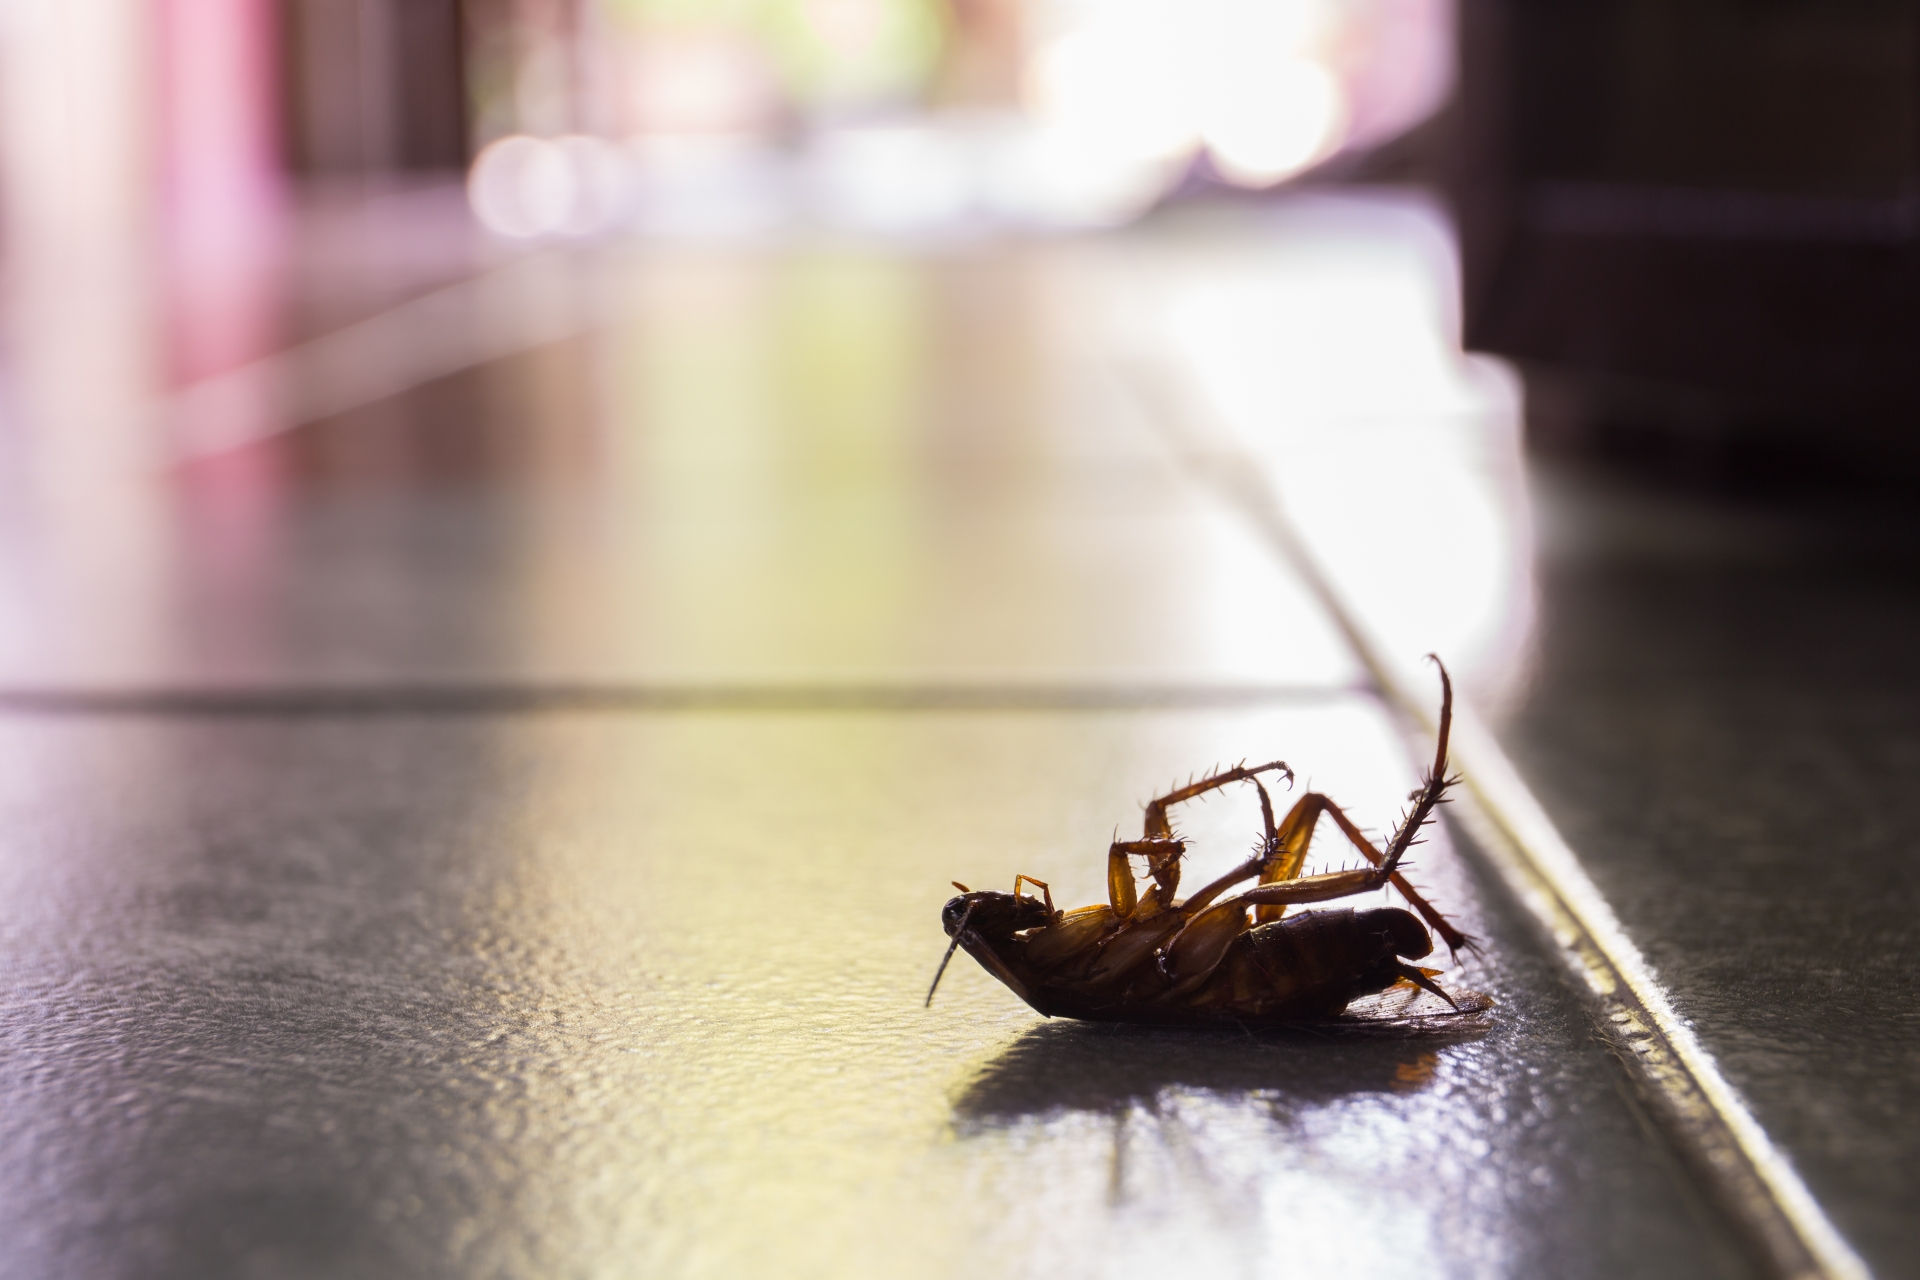 Cockroach Control, Pest Control in Battersea, SW11 . Call Now 020 8166 9746